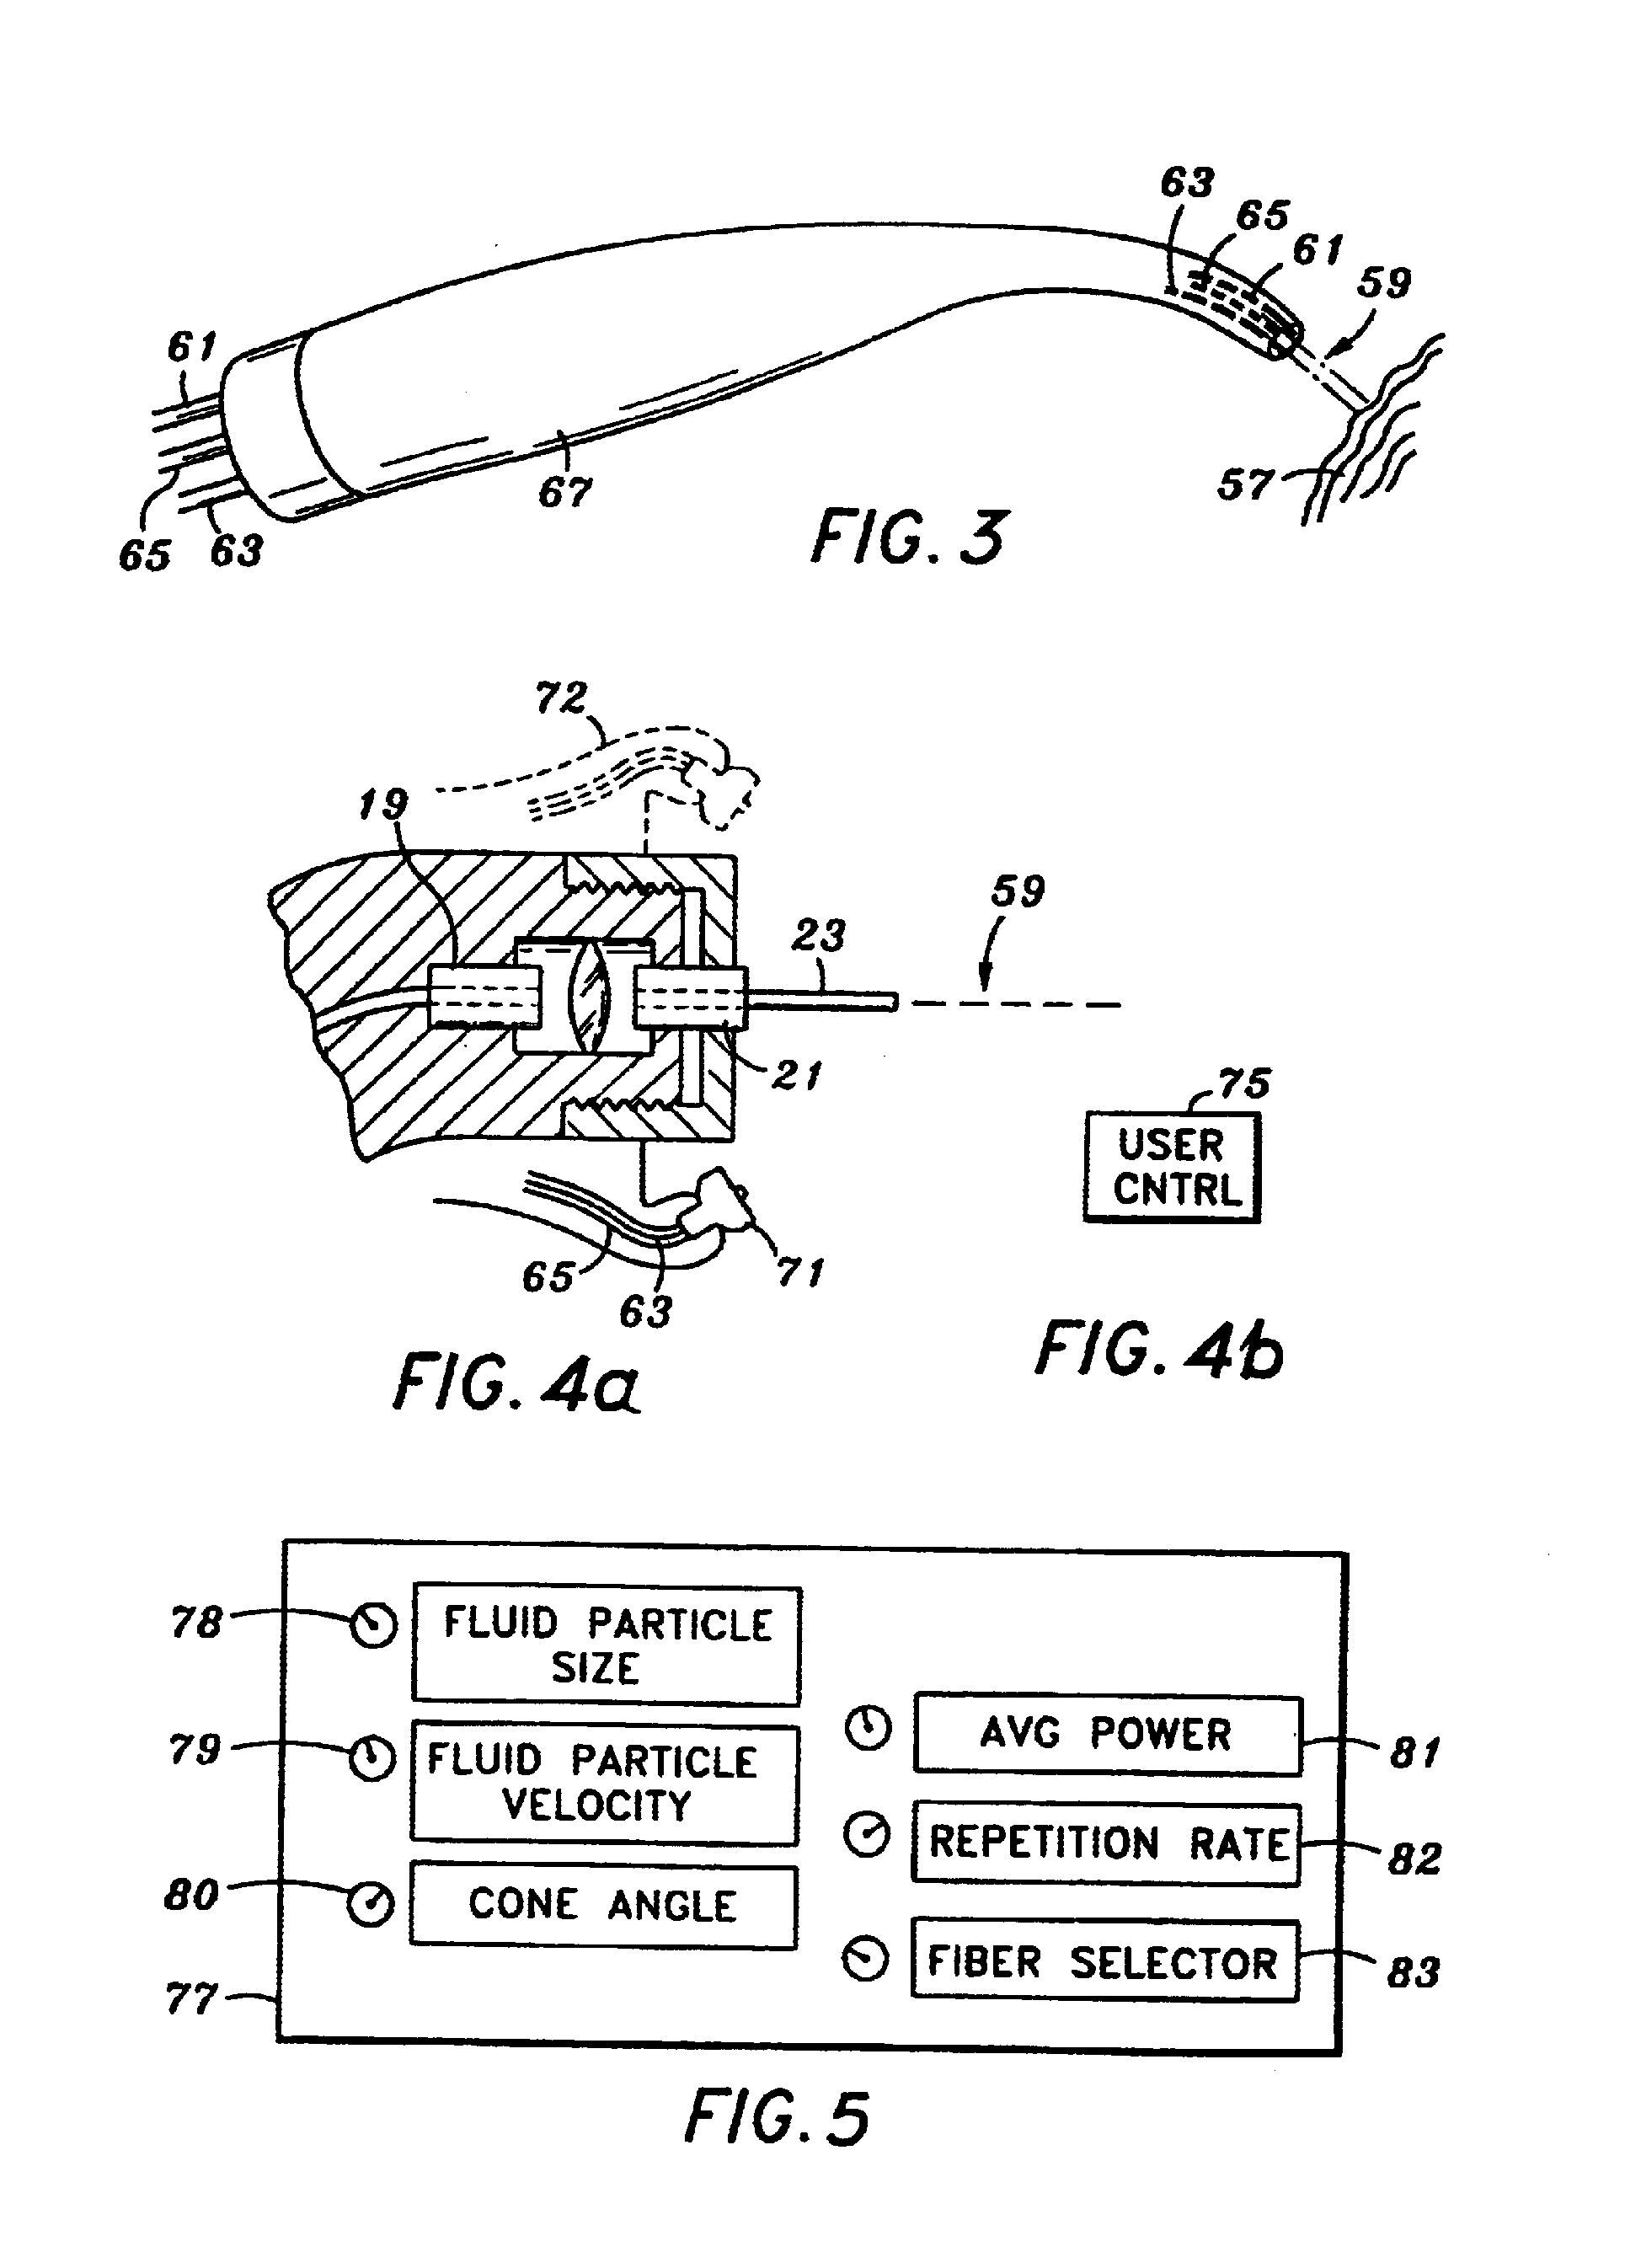 Tunnelling probe